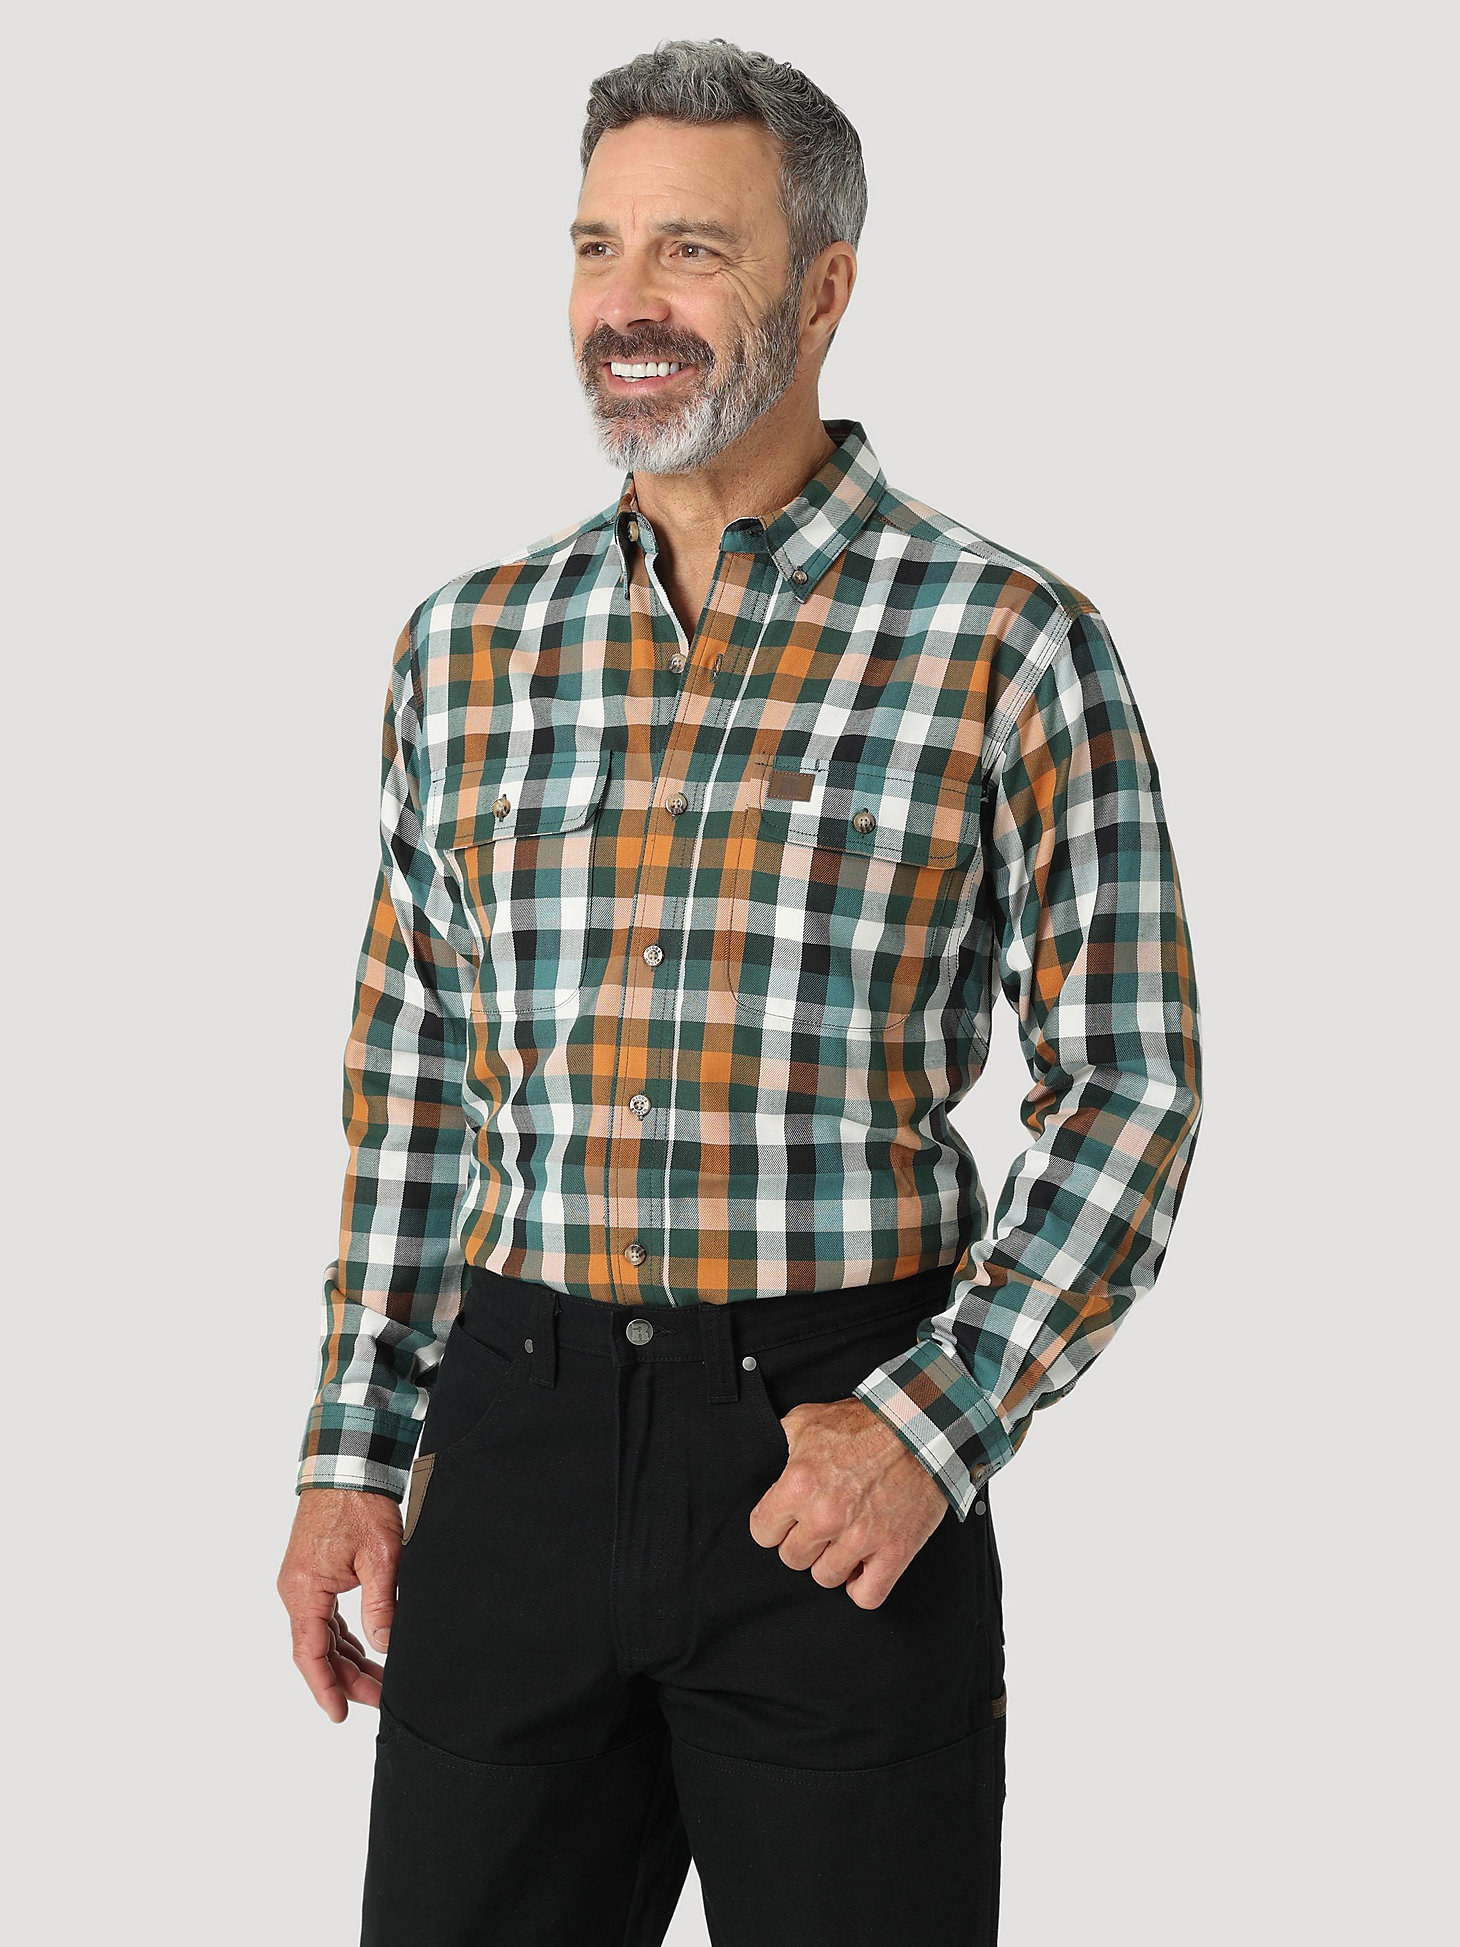 Wrangler® RIGGS Workwear® Long Sleeve Plaid Work Shirt in Sierra Forest main view